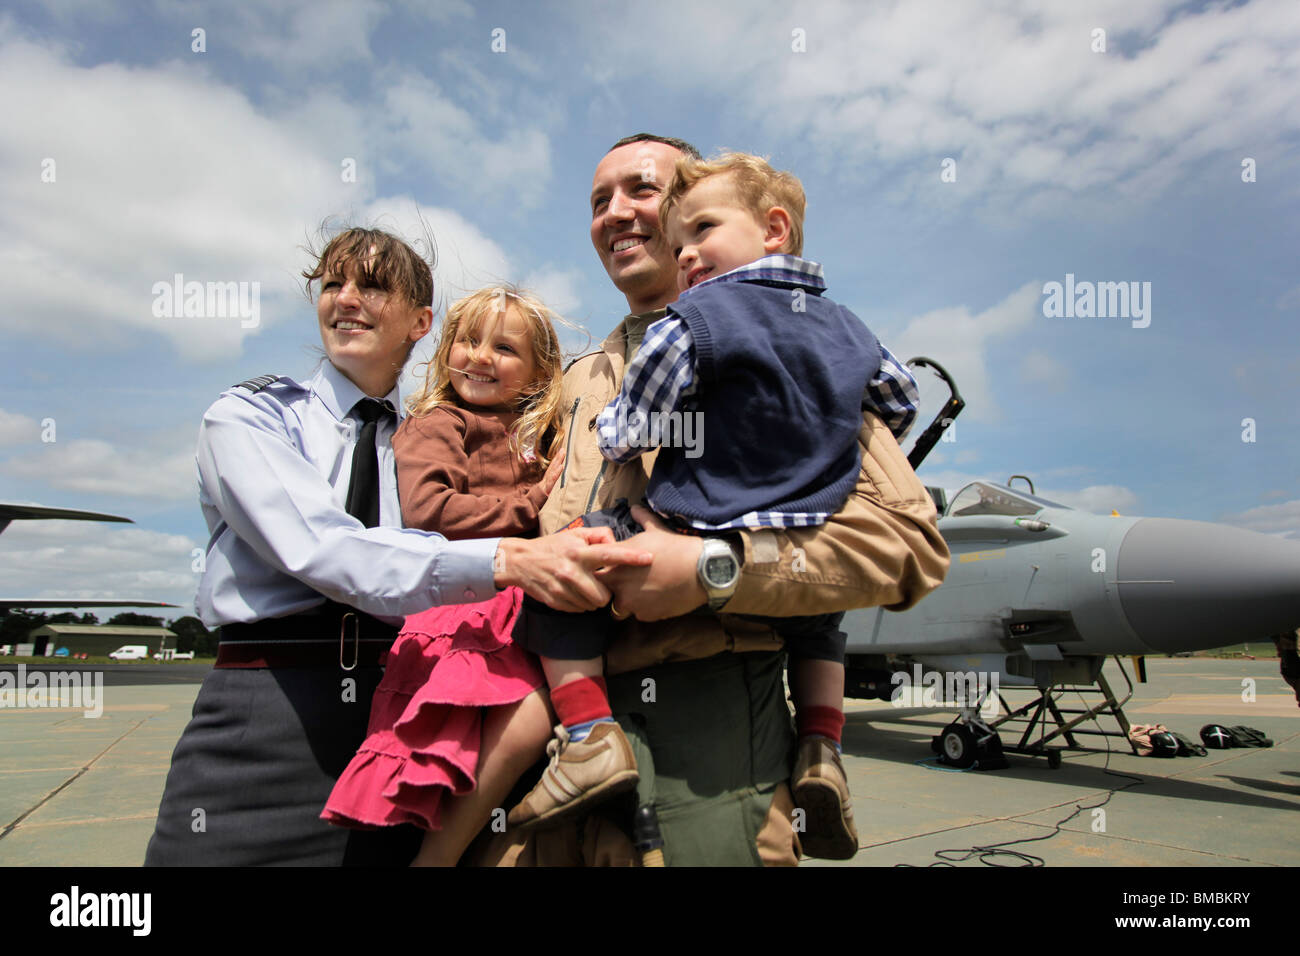 Sqn Ldr Nathan Giles, Holly Giles, Edward Giles & wife Sqn Ldr Anne Giles pose together after being reunited at RAF Marham. Stock Photo